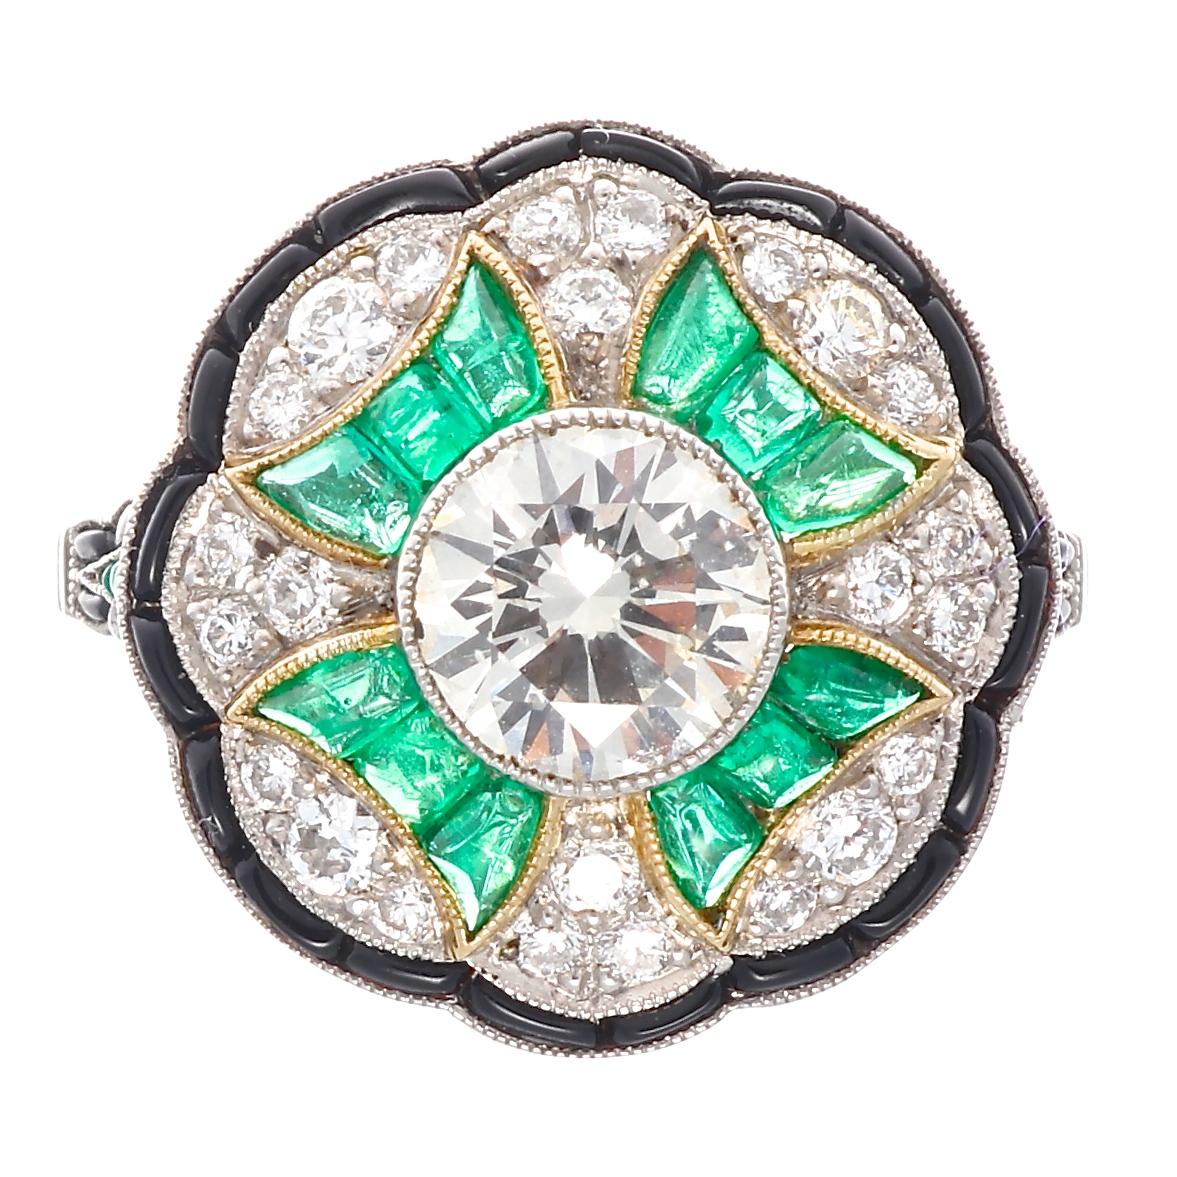 A perfect representation of the style of the lavish Art Deco time period. Featuring a 1.12 carat transitional cut diamond that is approximately J color, VS2 clarity. Accented by an exploding bouquet of color that is designed with vibrant green